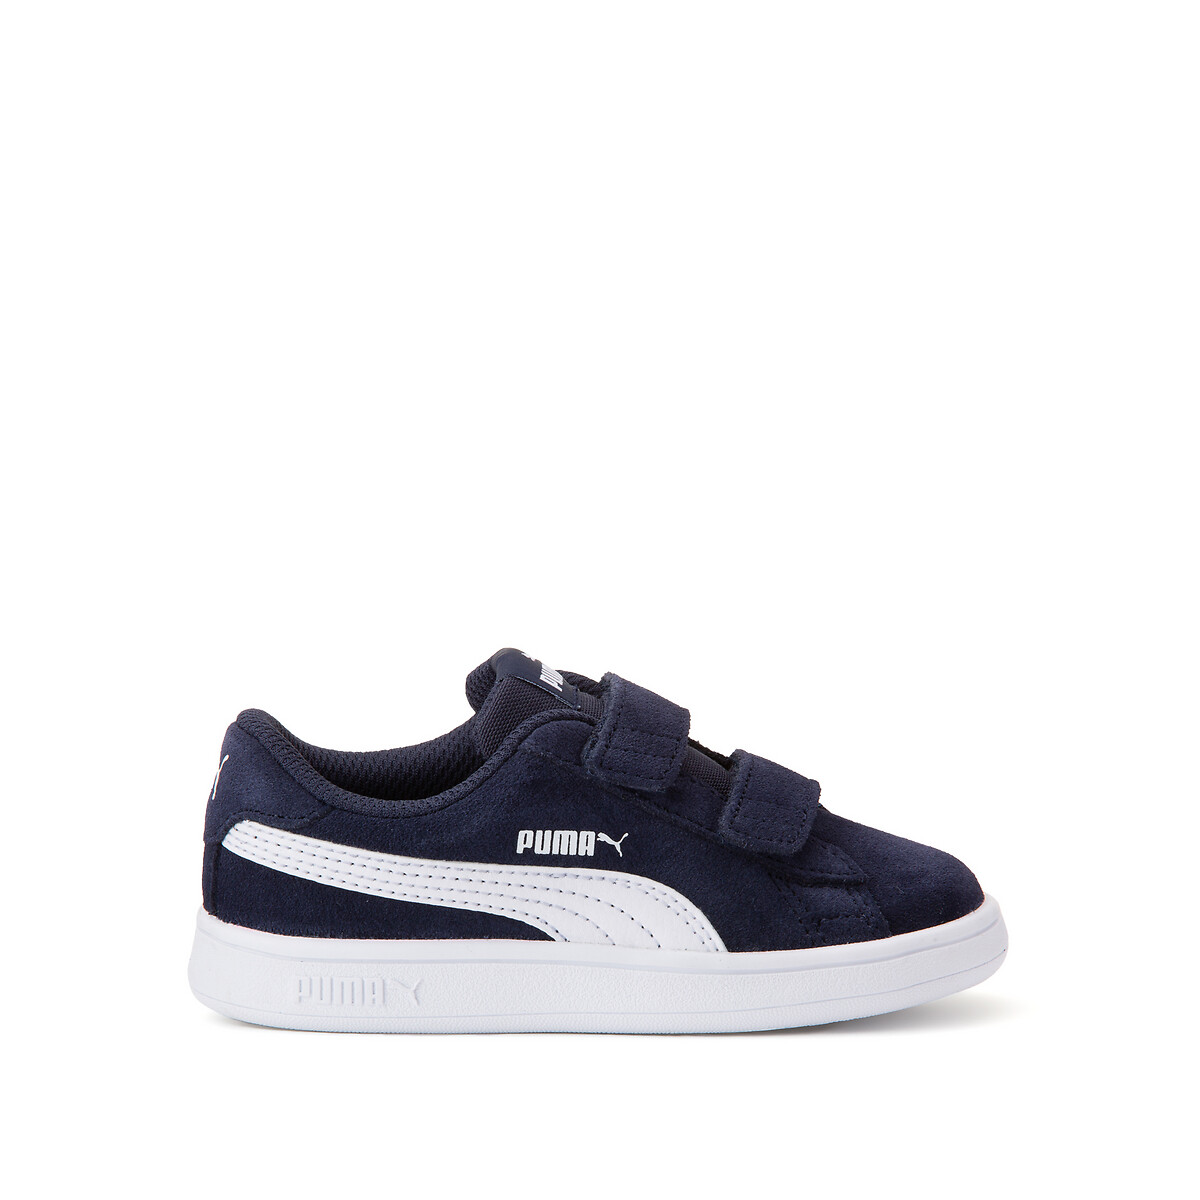 Kids smash v2 sd v trainers in leather, navy blue, Puma | La Redoute